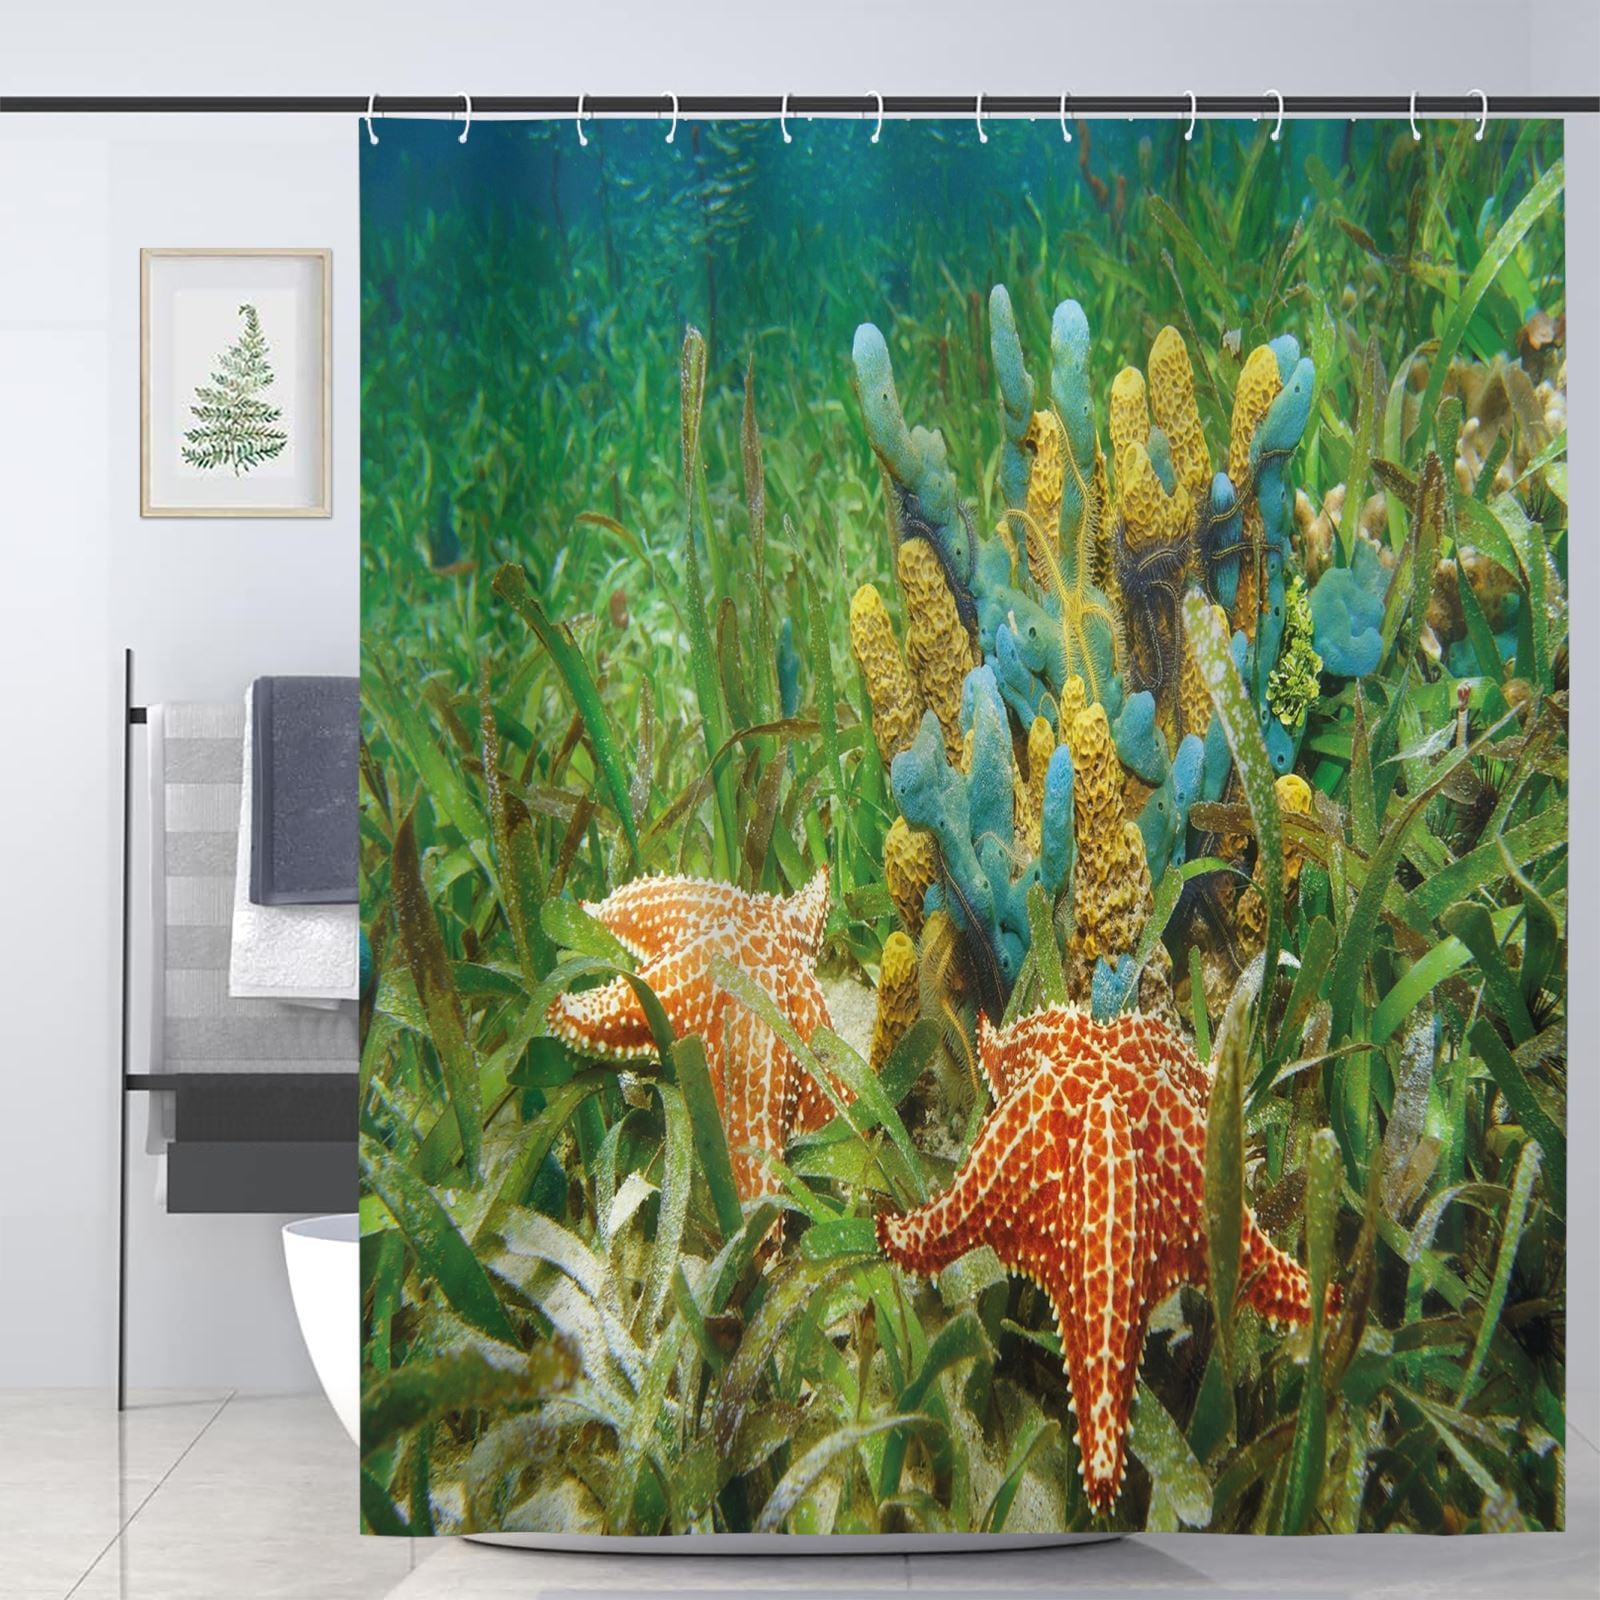 72x72" Fabric Shower Curtain Set Underwater World with Fish and Plants Anemones 